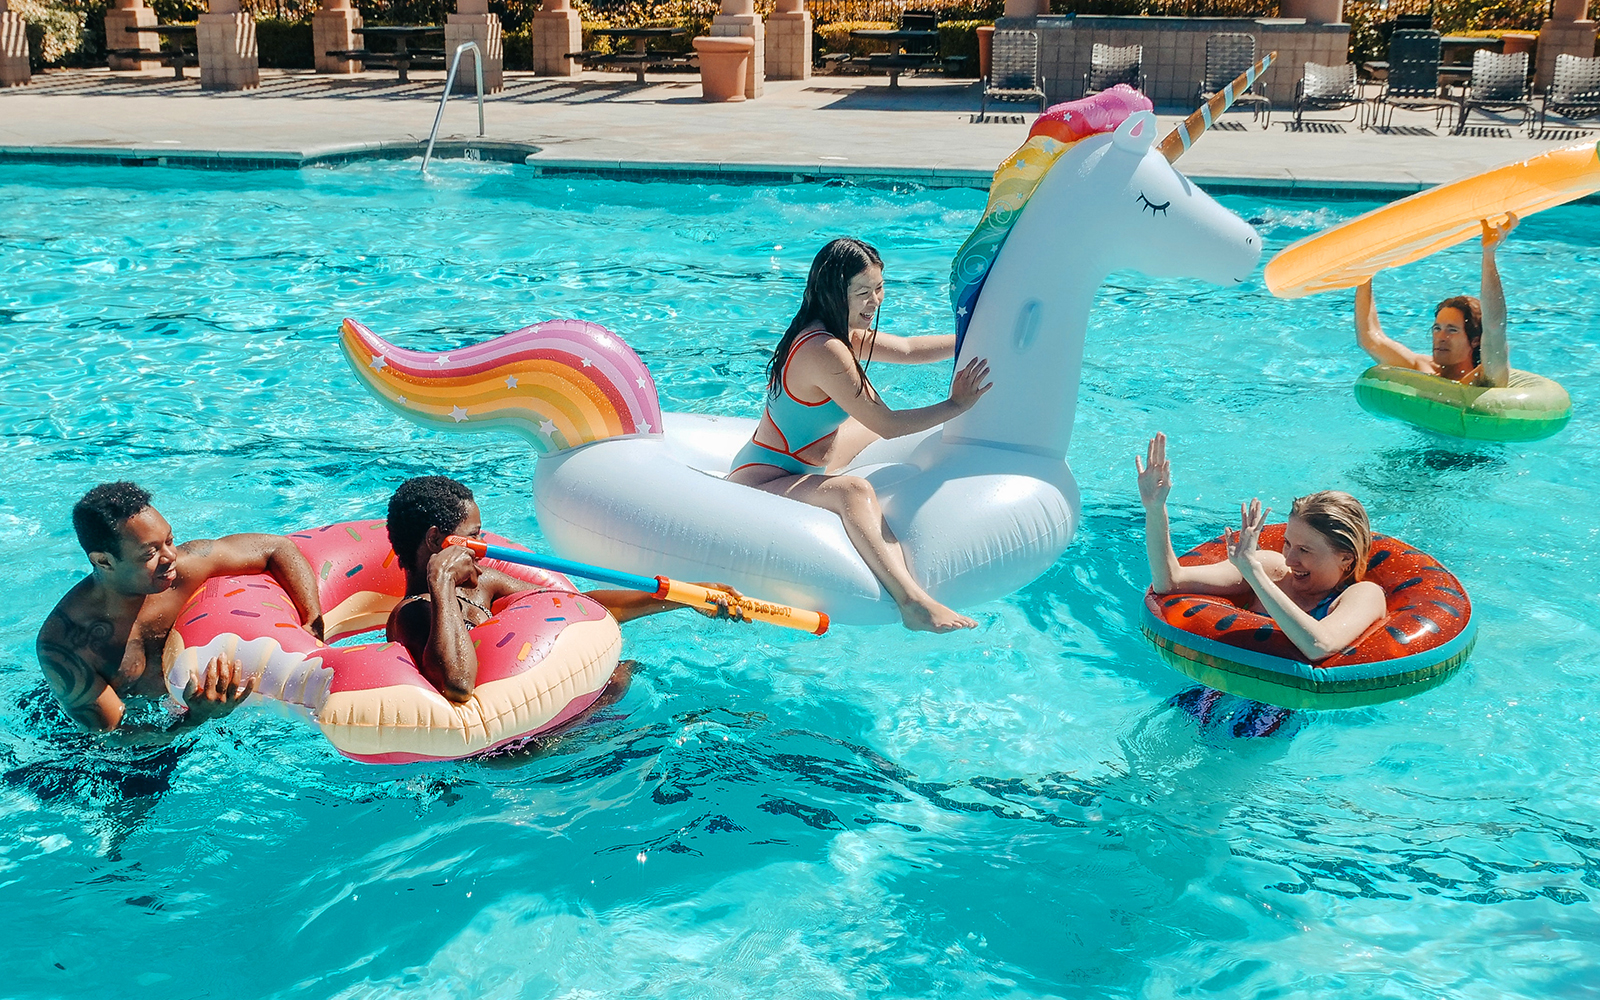 group of young adults on pool floats in swimming pool